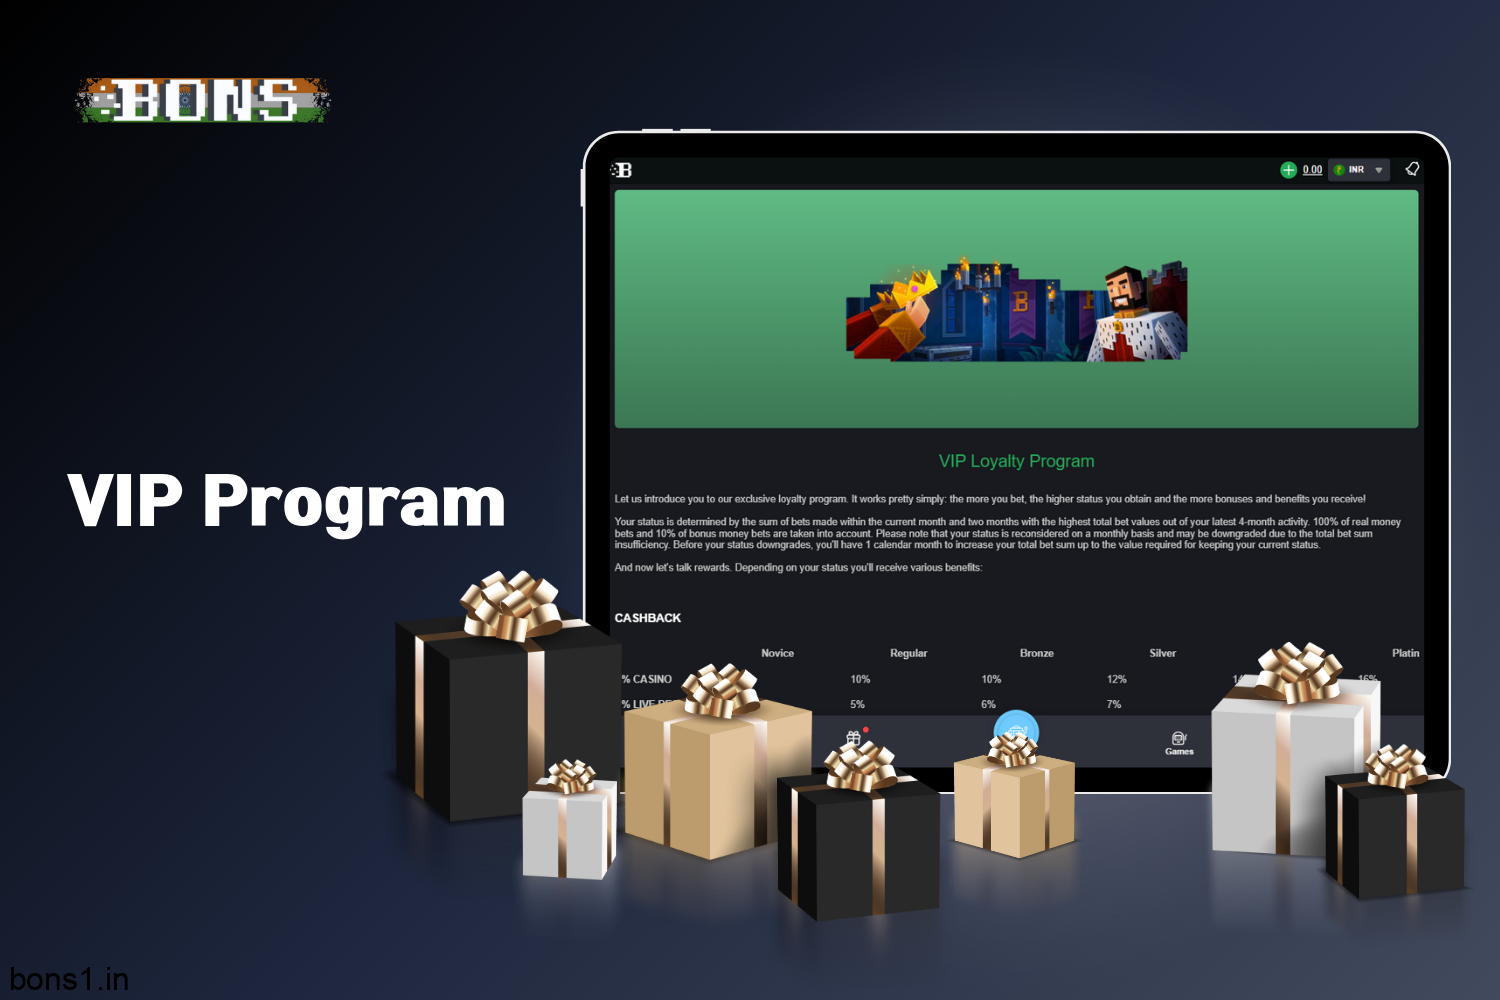 Bons Casino offers a VIP program for users from India